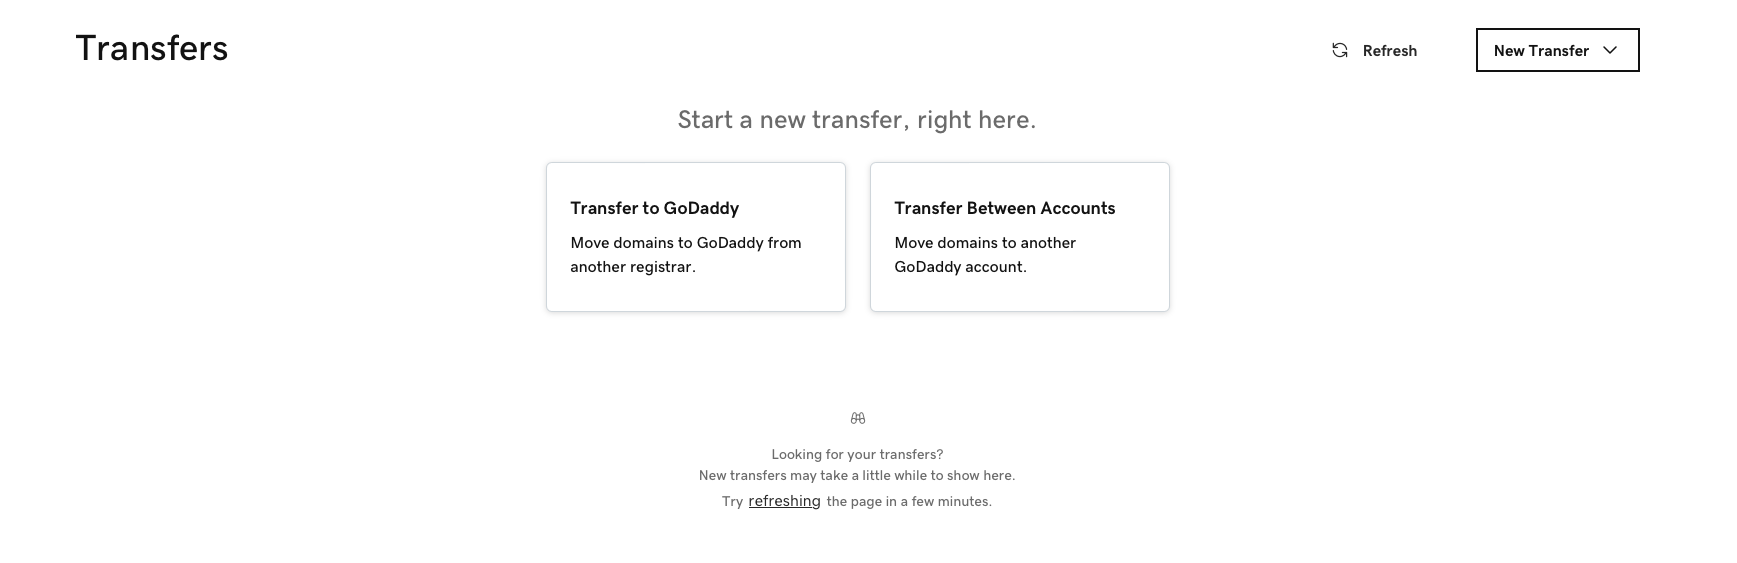 Transfers page, when you have nothing